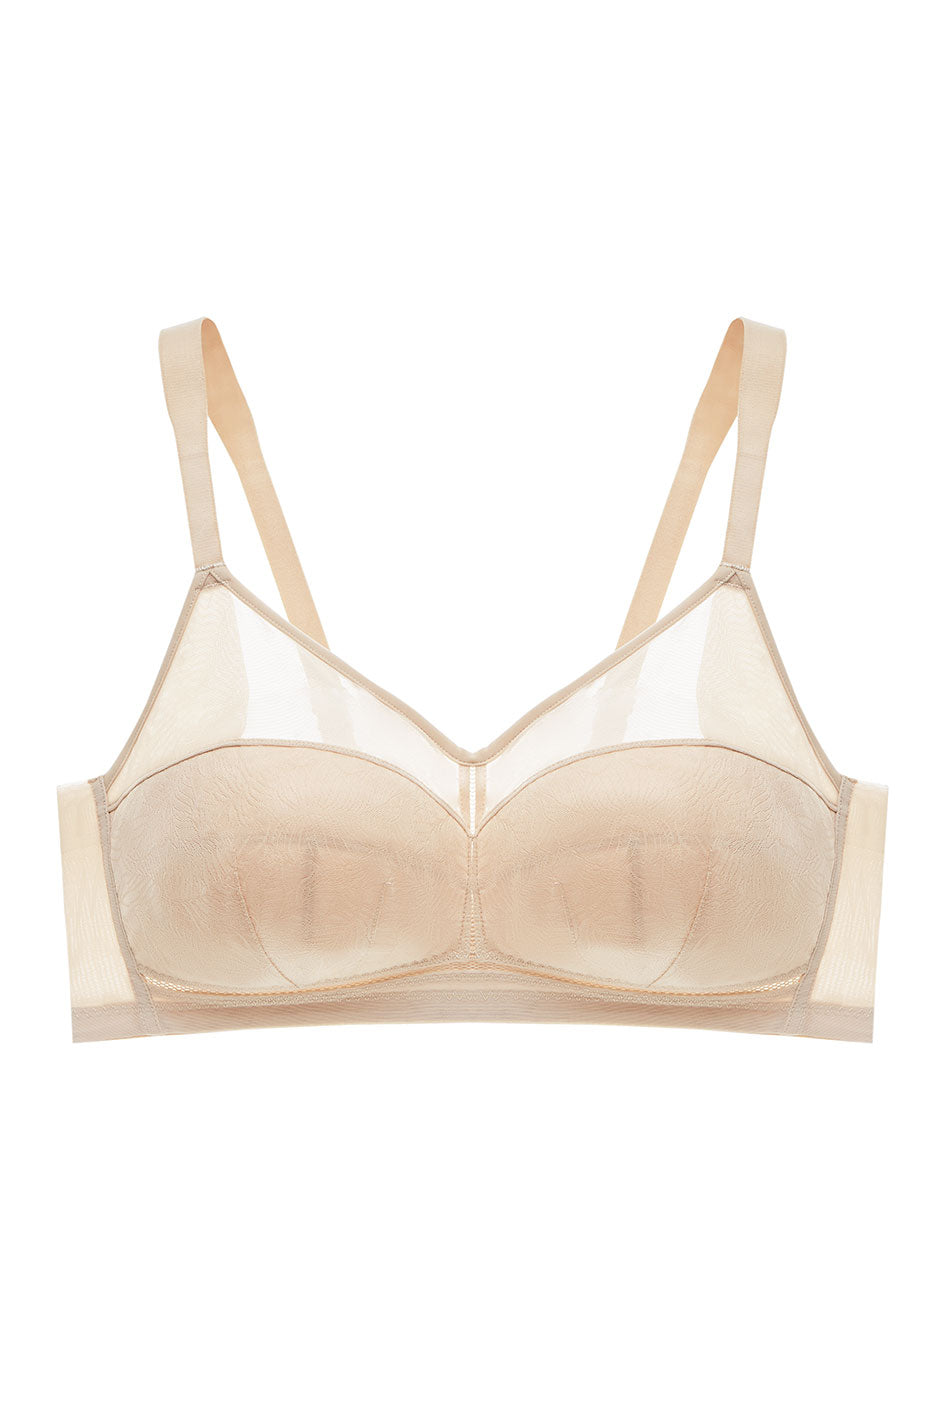 CamiLace - Comfort Wireless Front Close Bra, CamiLace Comfy Wireless Bra,  Plus Size Bra Front Close Bras for Women (Beige,XL) : : Clothing,  Shoes & Accessories